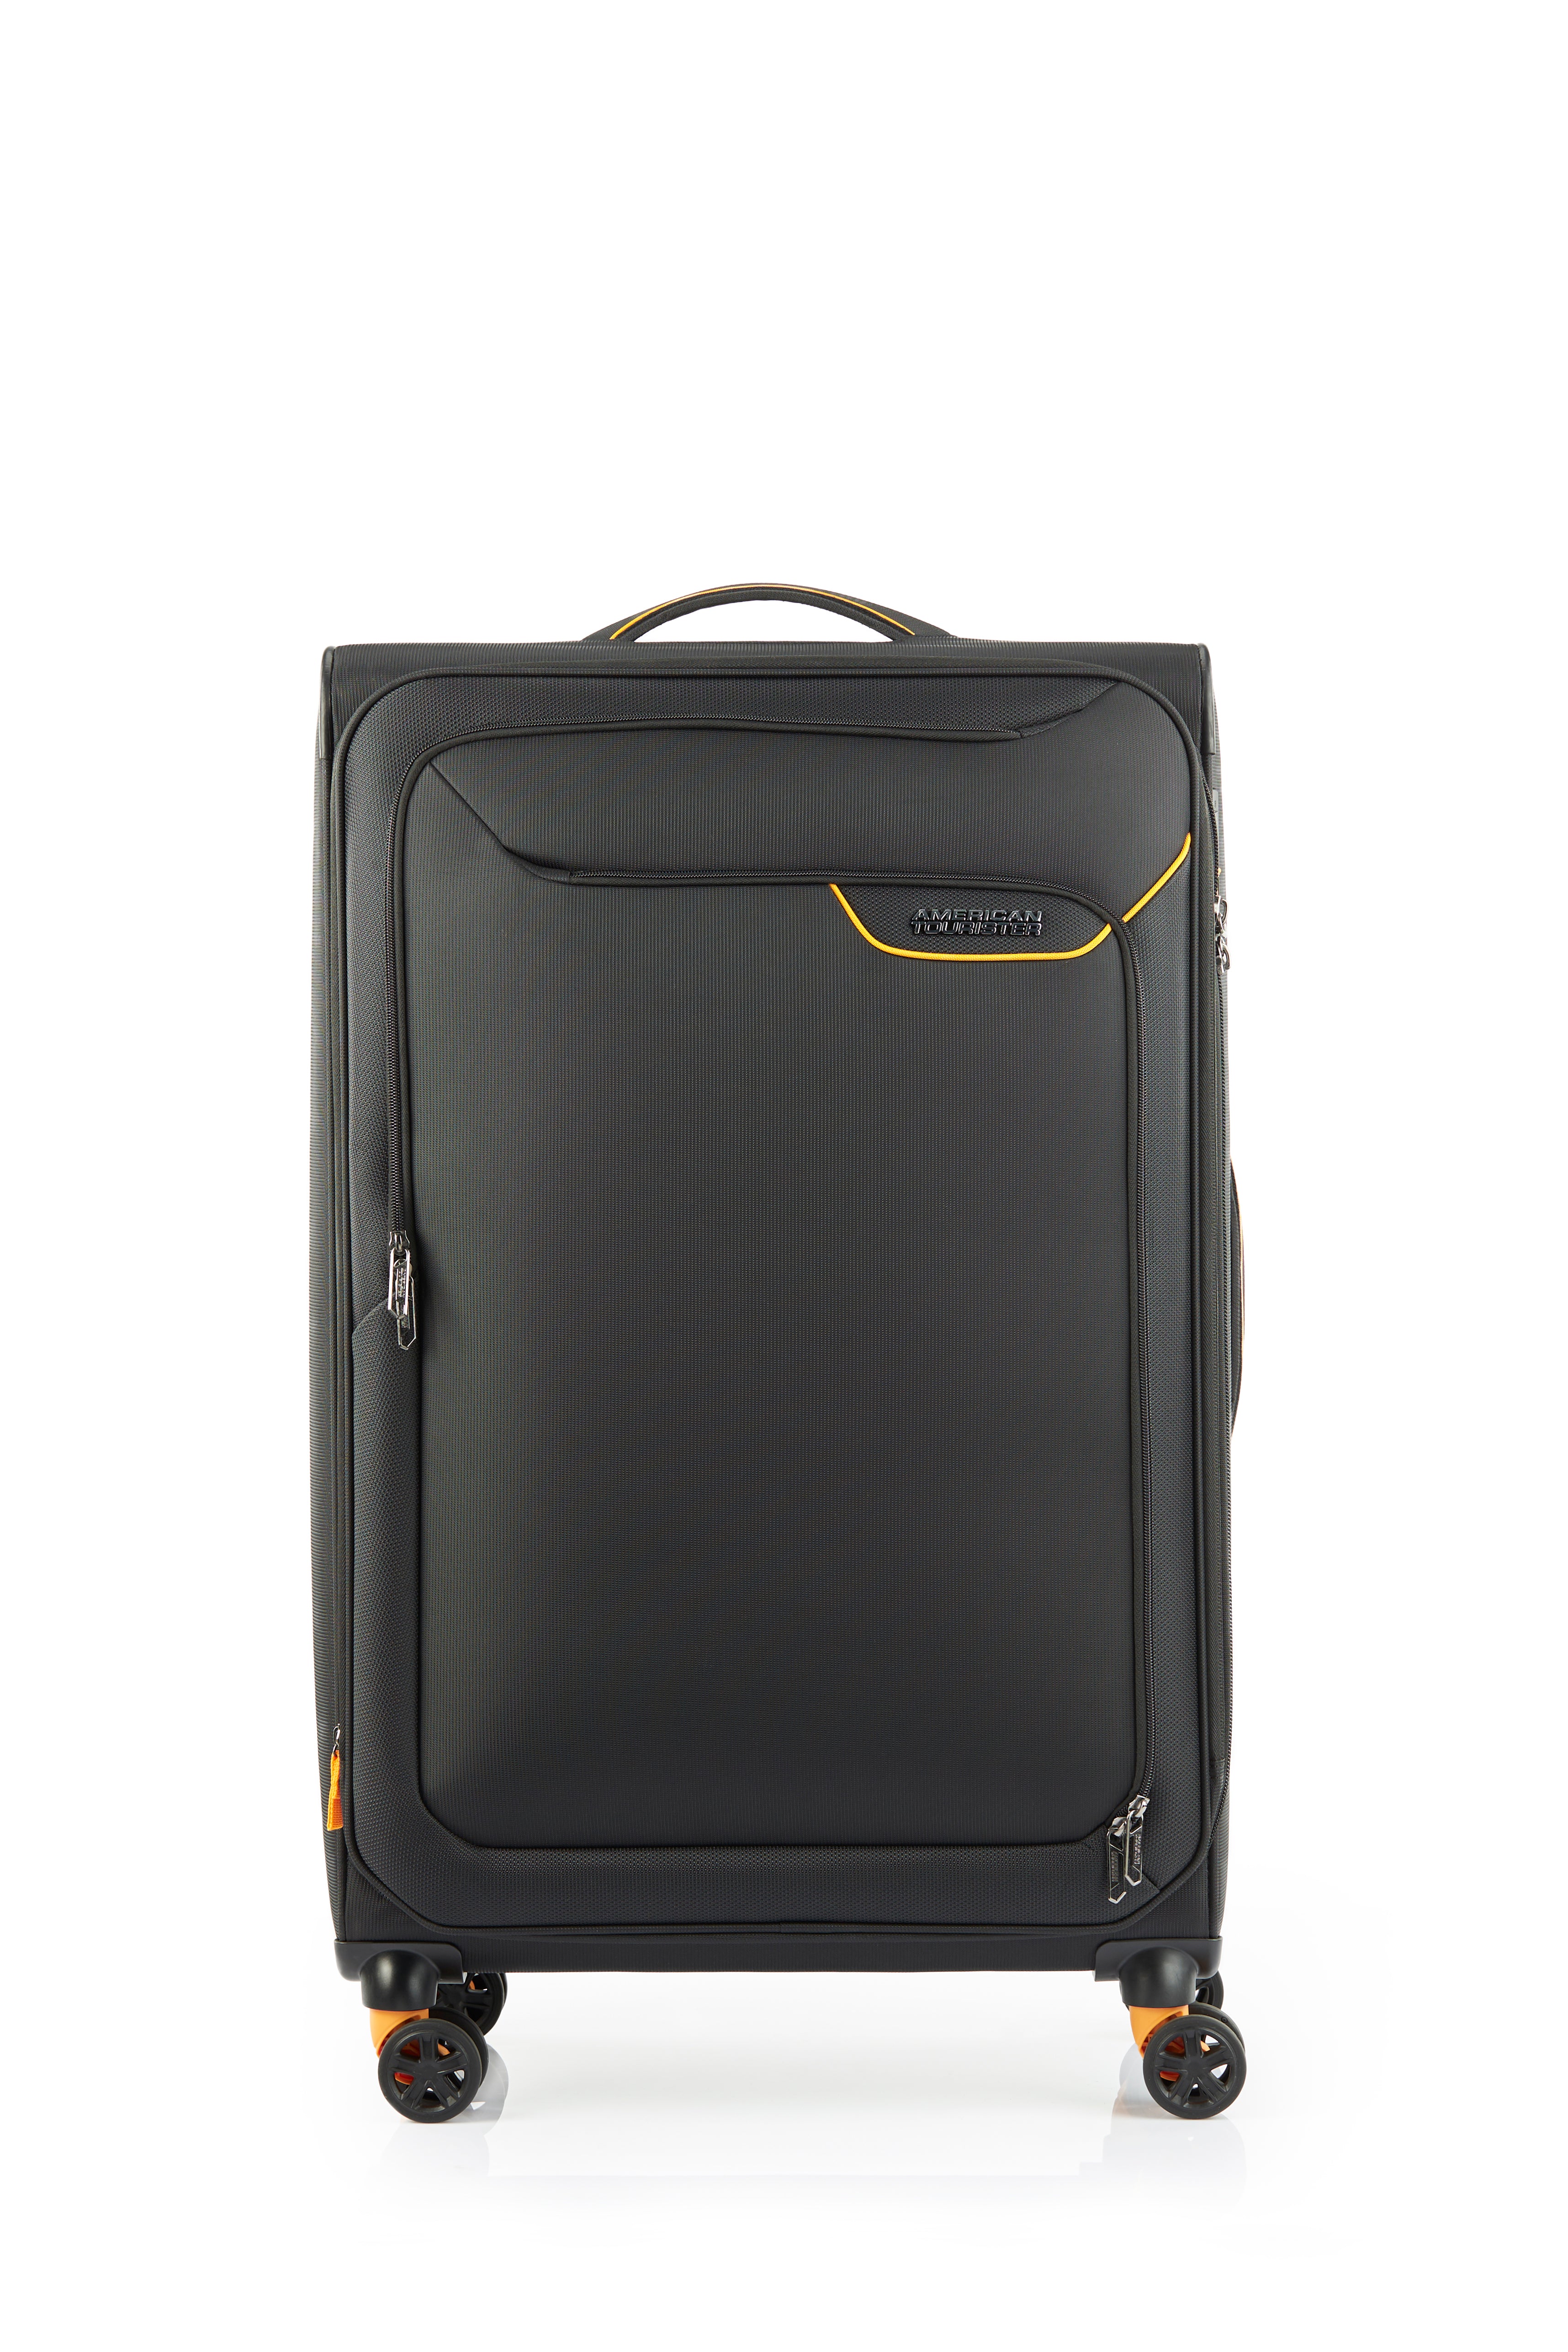 American Tourister - Applite ECO 82cm Large Suitcase - Black/Must-2